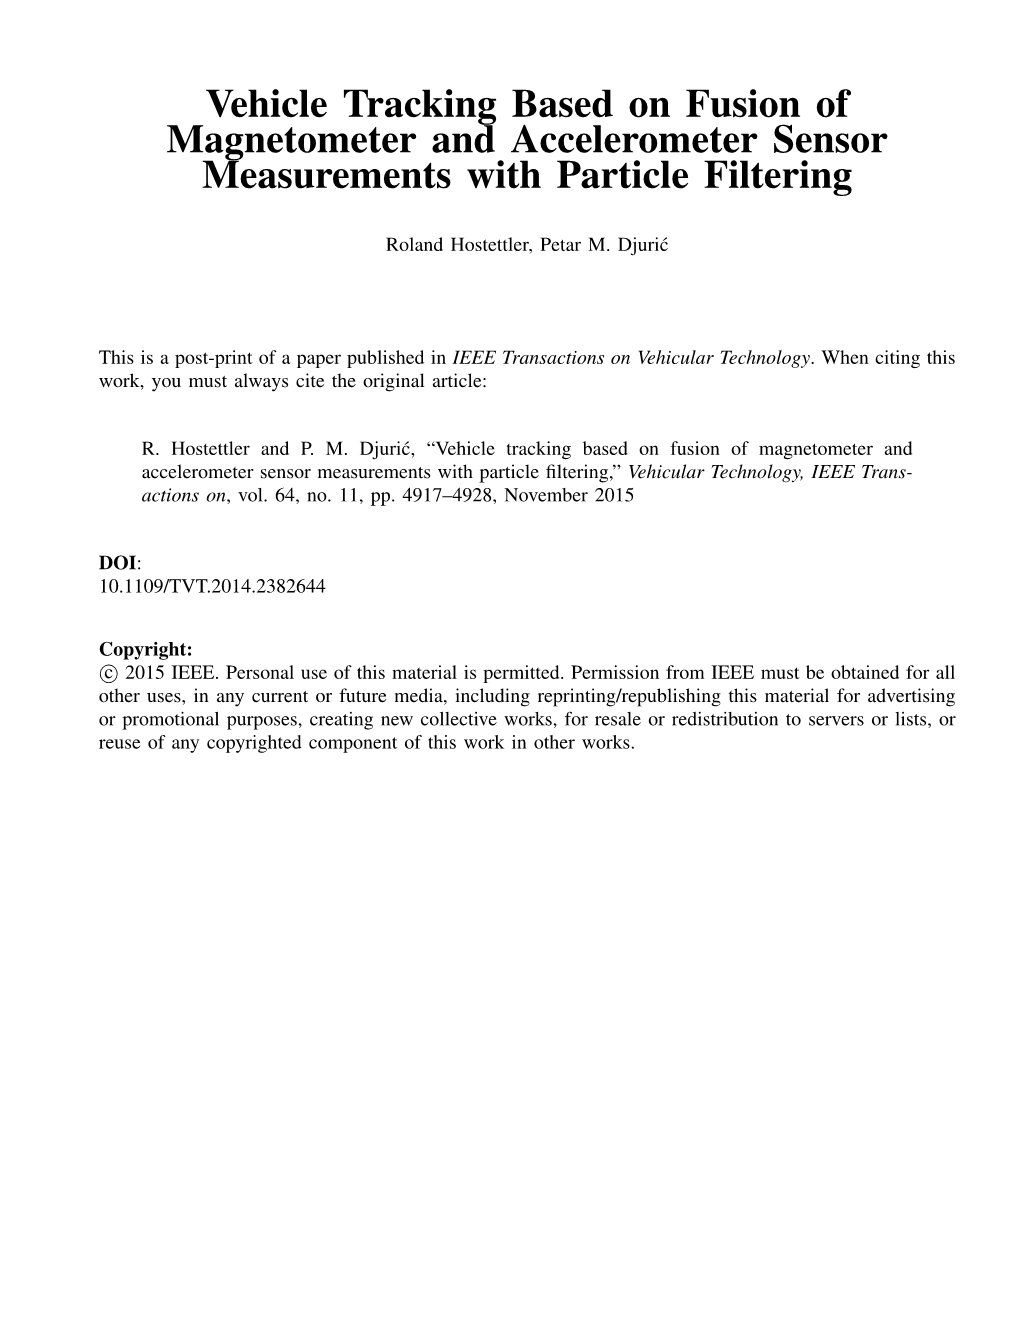 Vehicle Tracking Based on Fusion of Magnetometer and Accelerometer Sensor Measurements with Particle Filtering